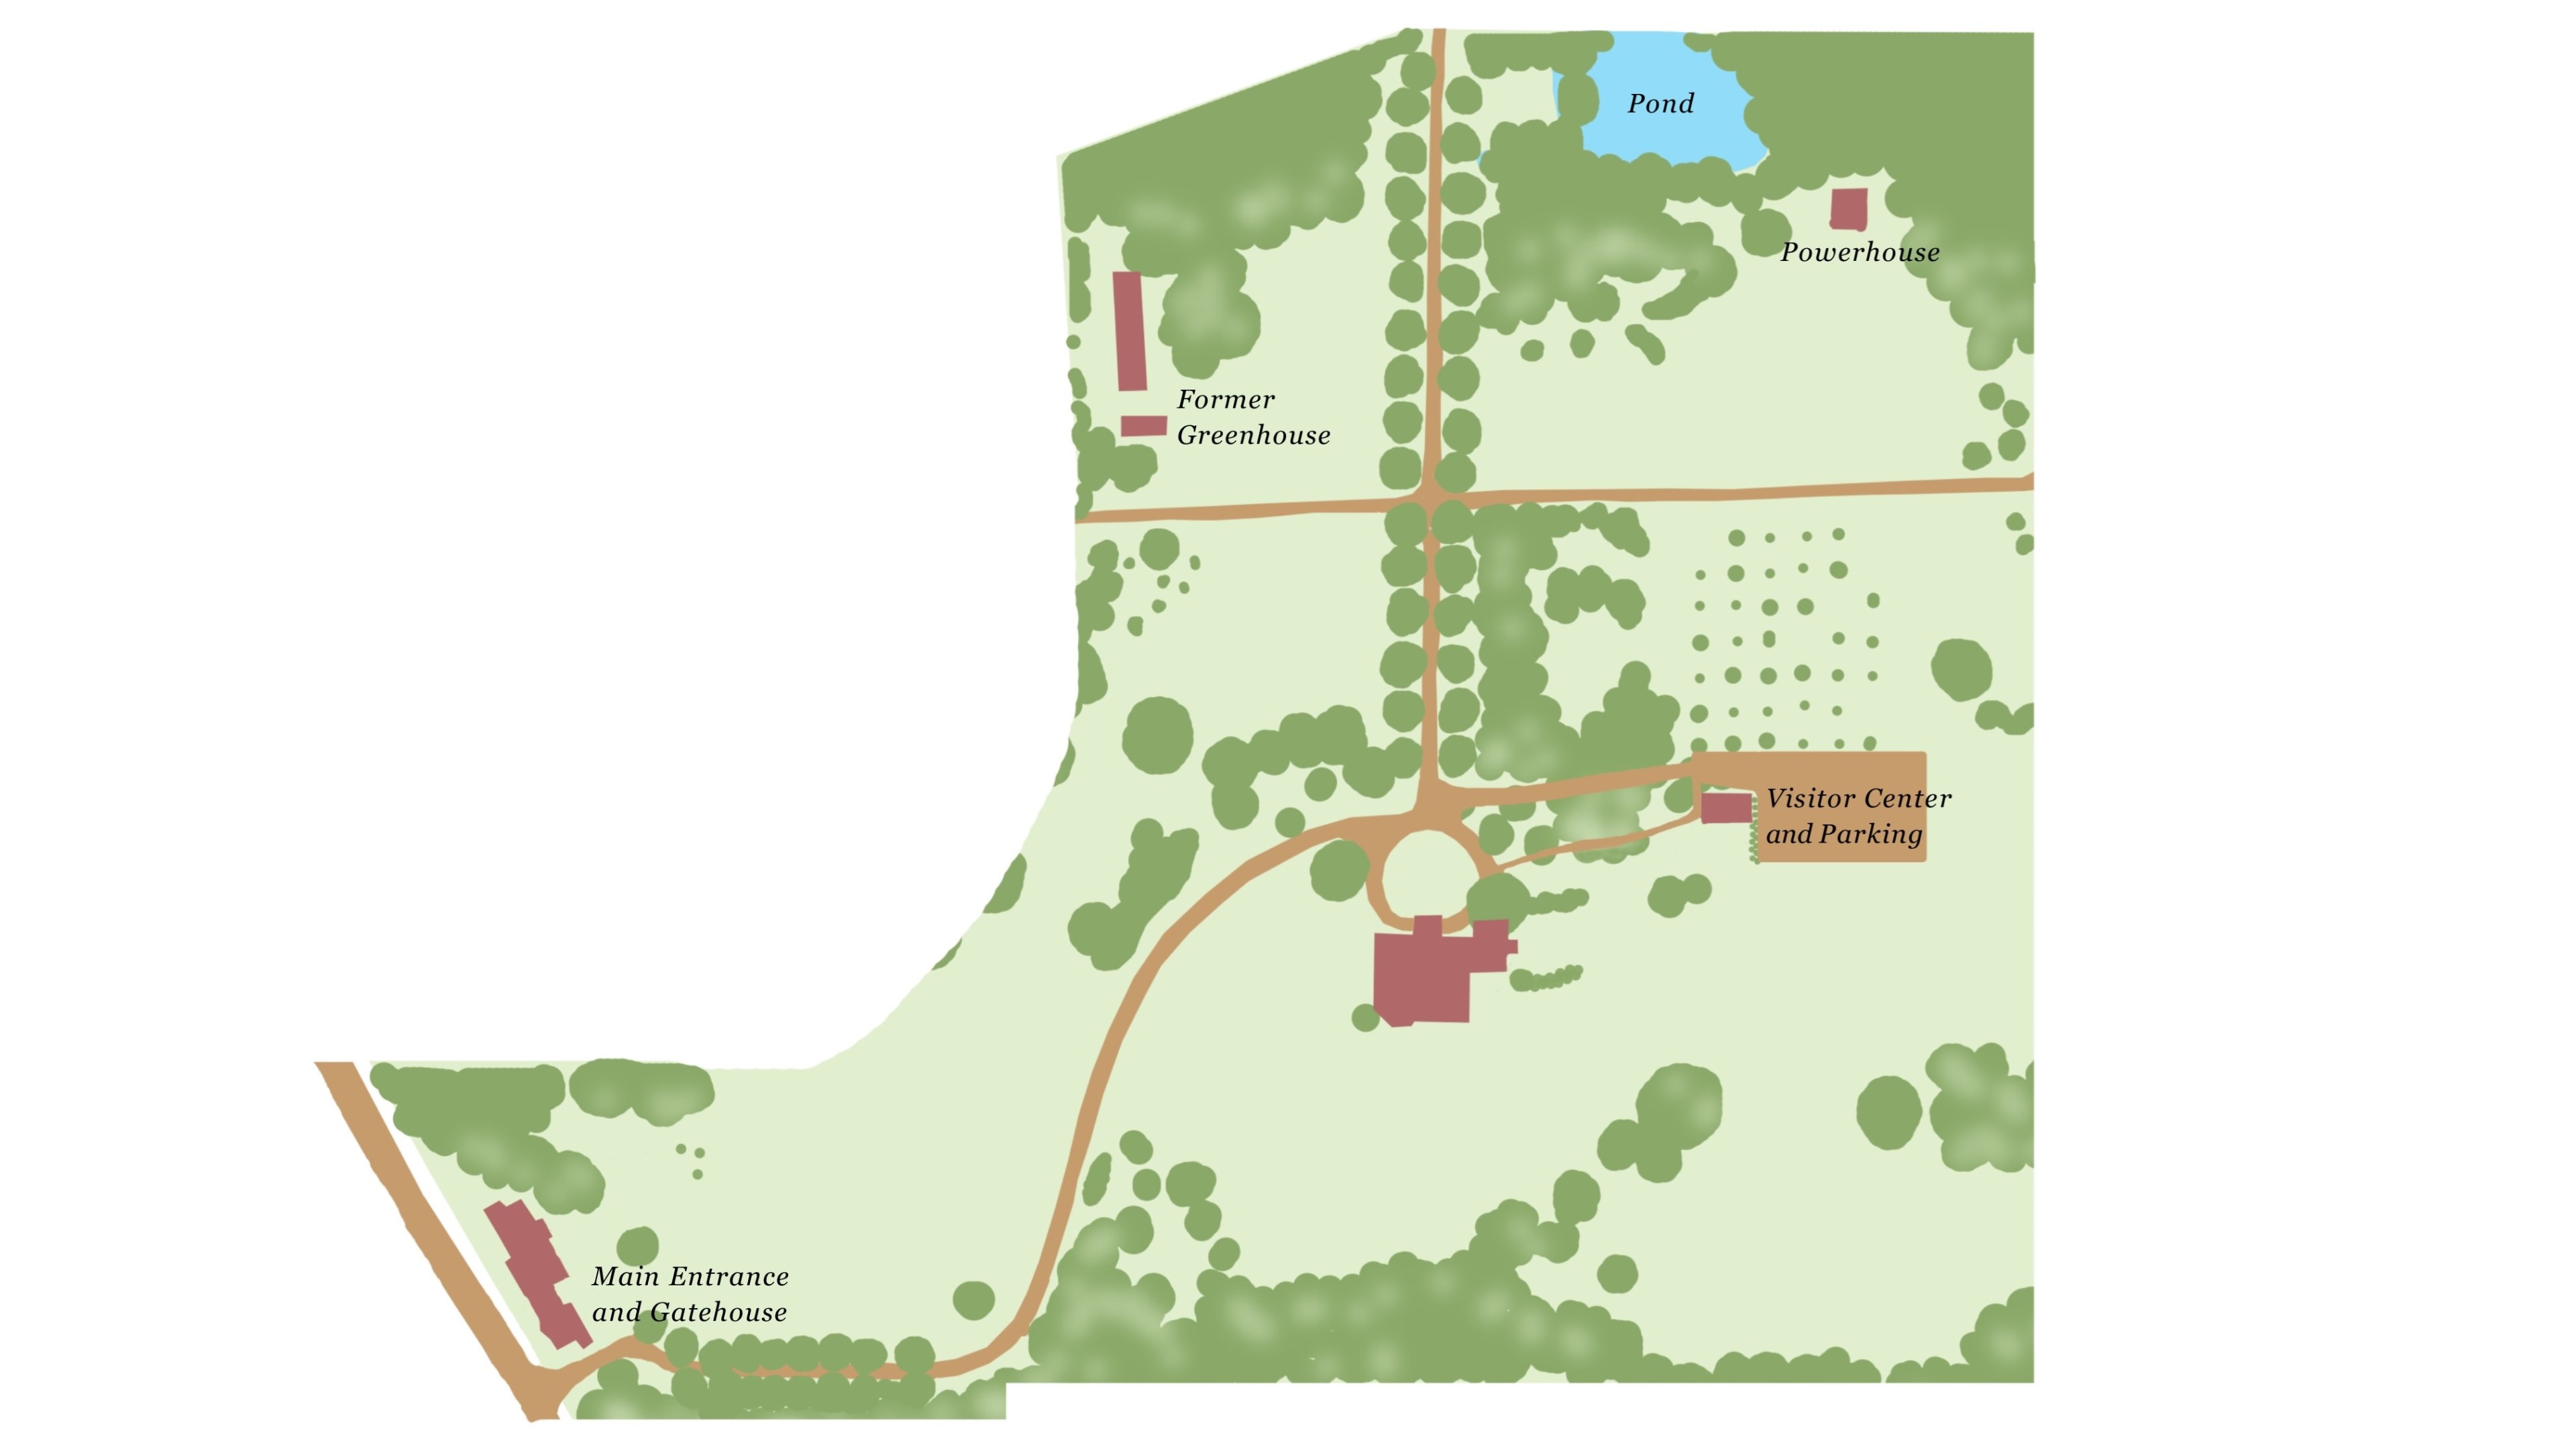 Overhead view map of the grounds.